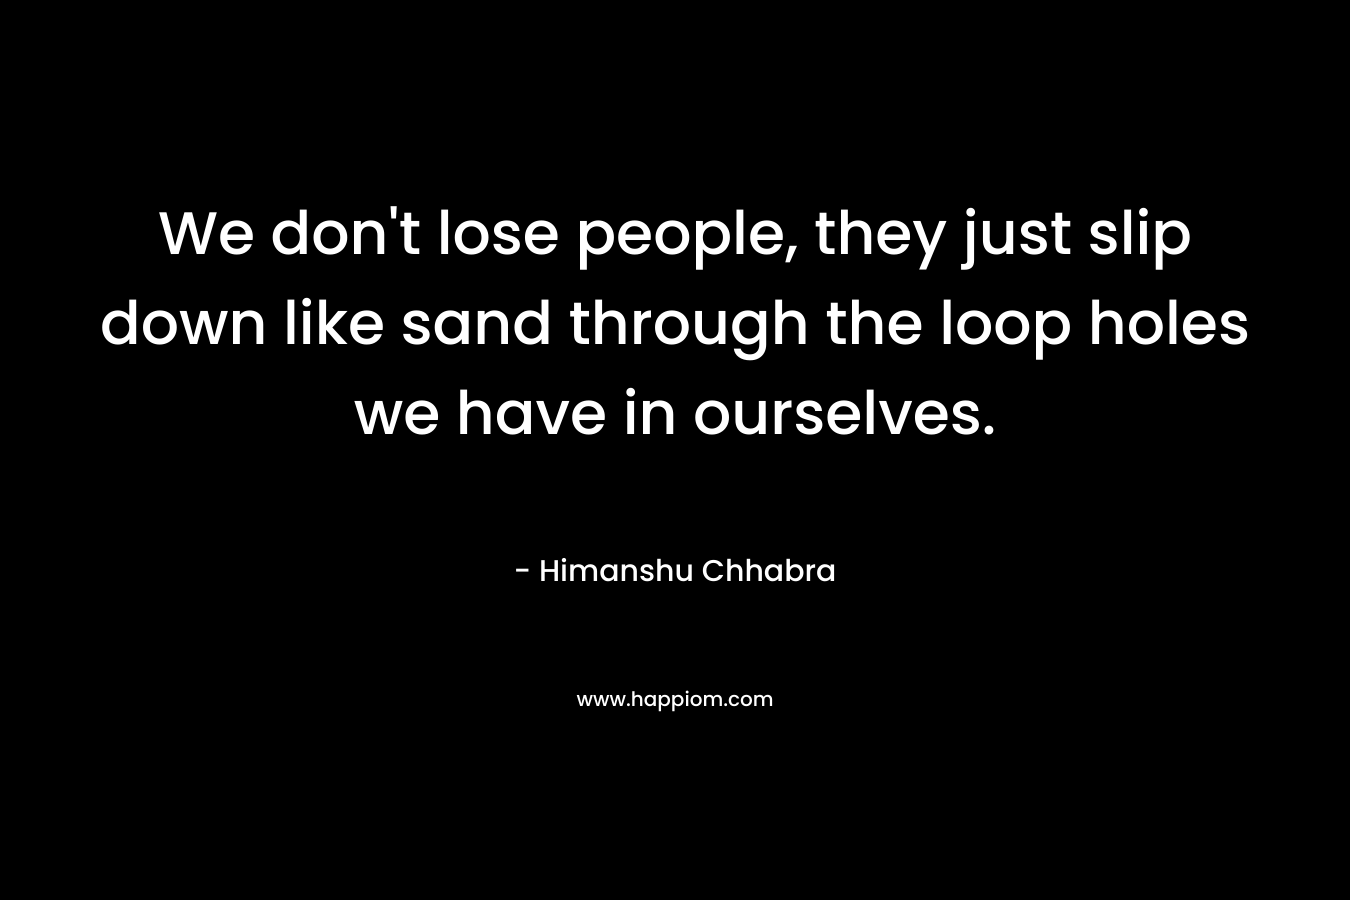 We don't lose people, they just slip down like sand through the loop holes we have in ourselves.